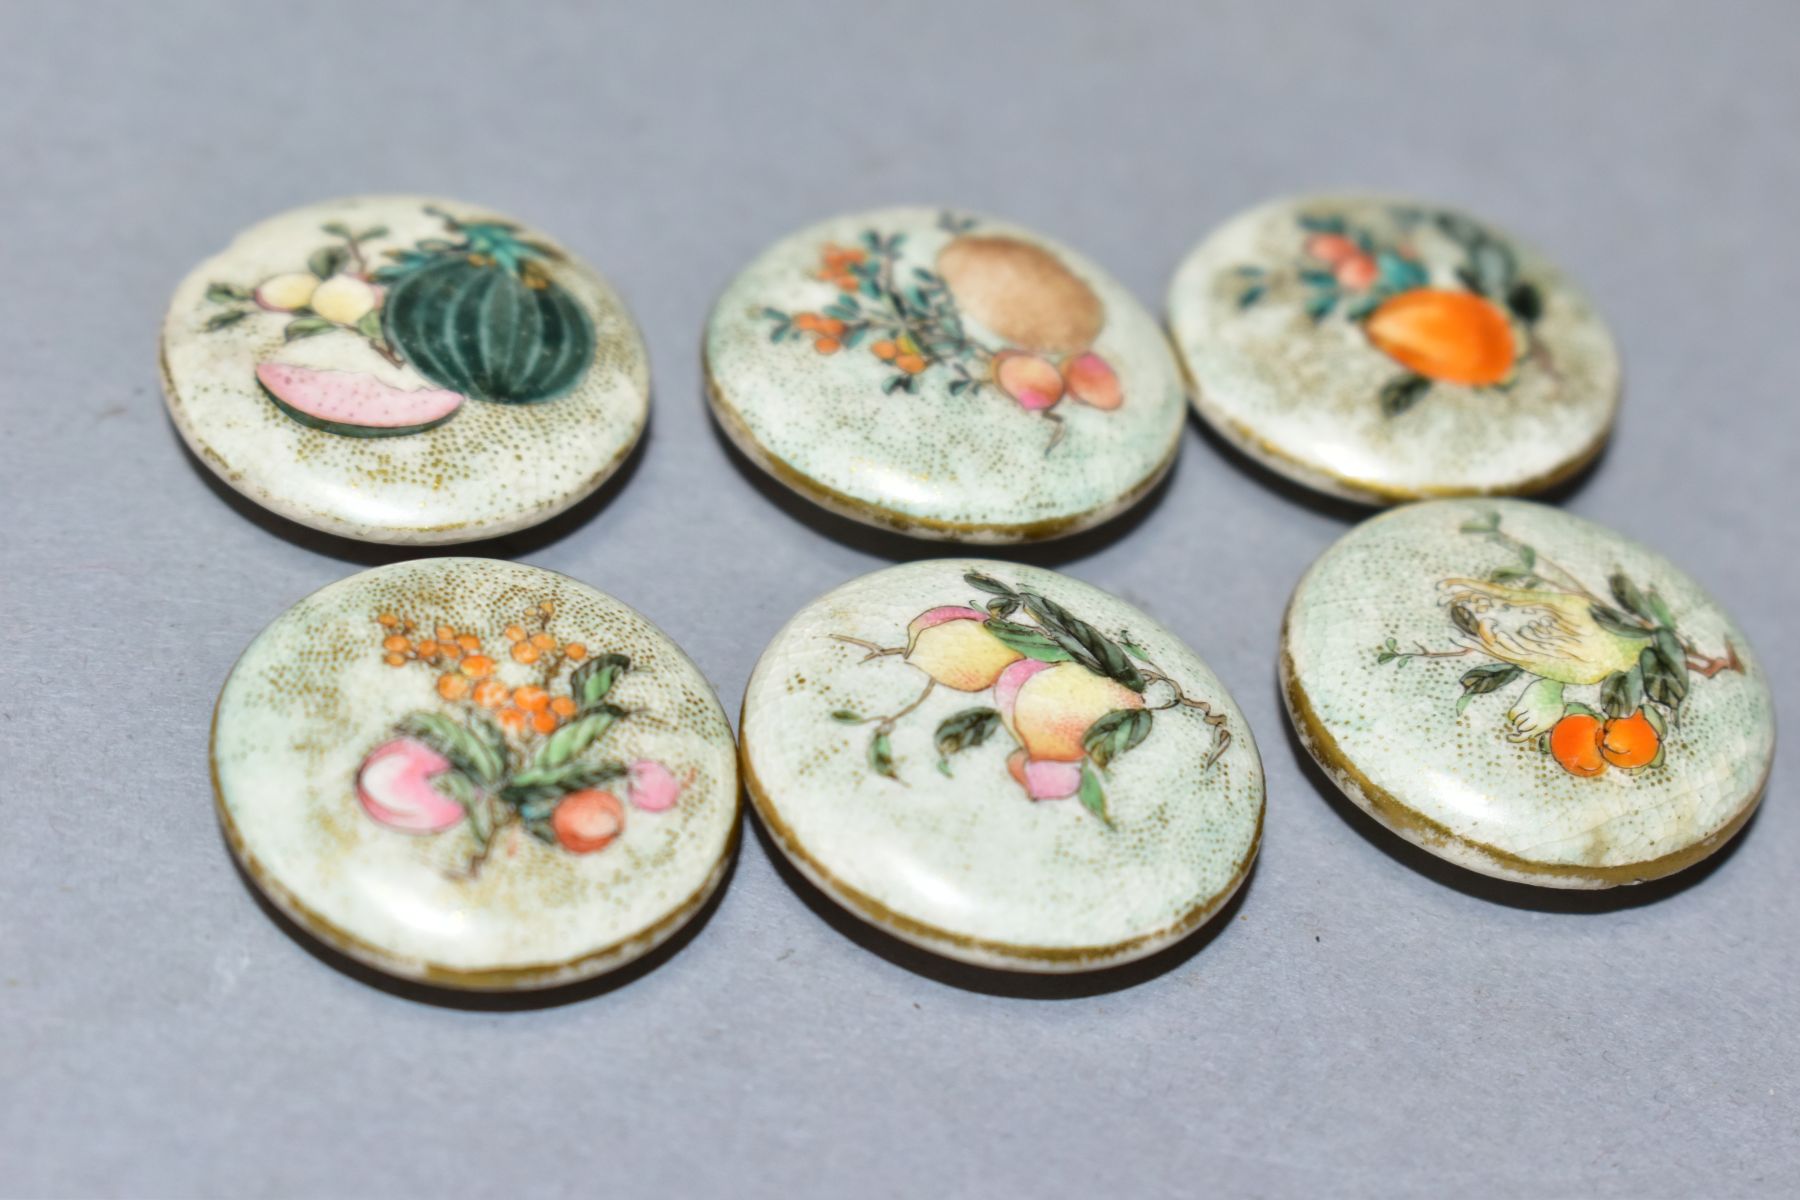 A SET OF SIX LATE 19TH/EARLY 20TH CENTURY JAPANESE SATSUMA POTTERY BUTTONS, painted with fruits - Image 4 of 4